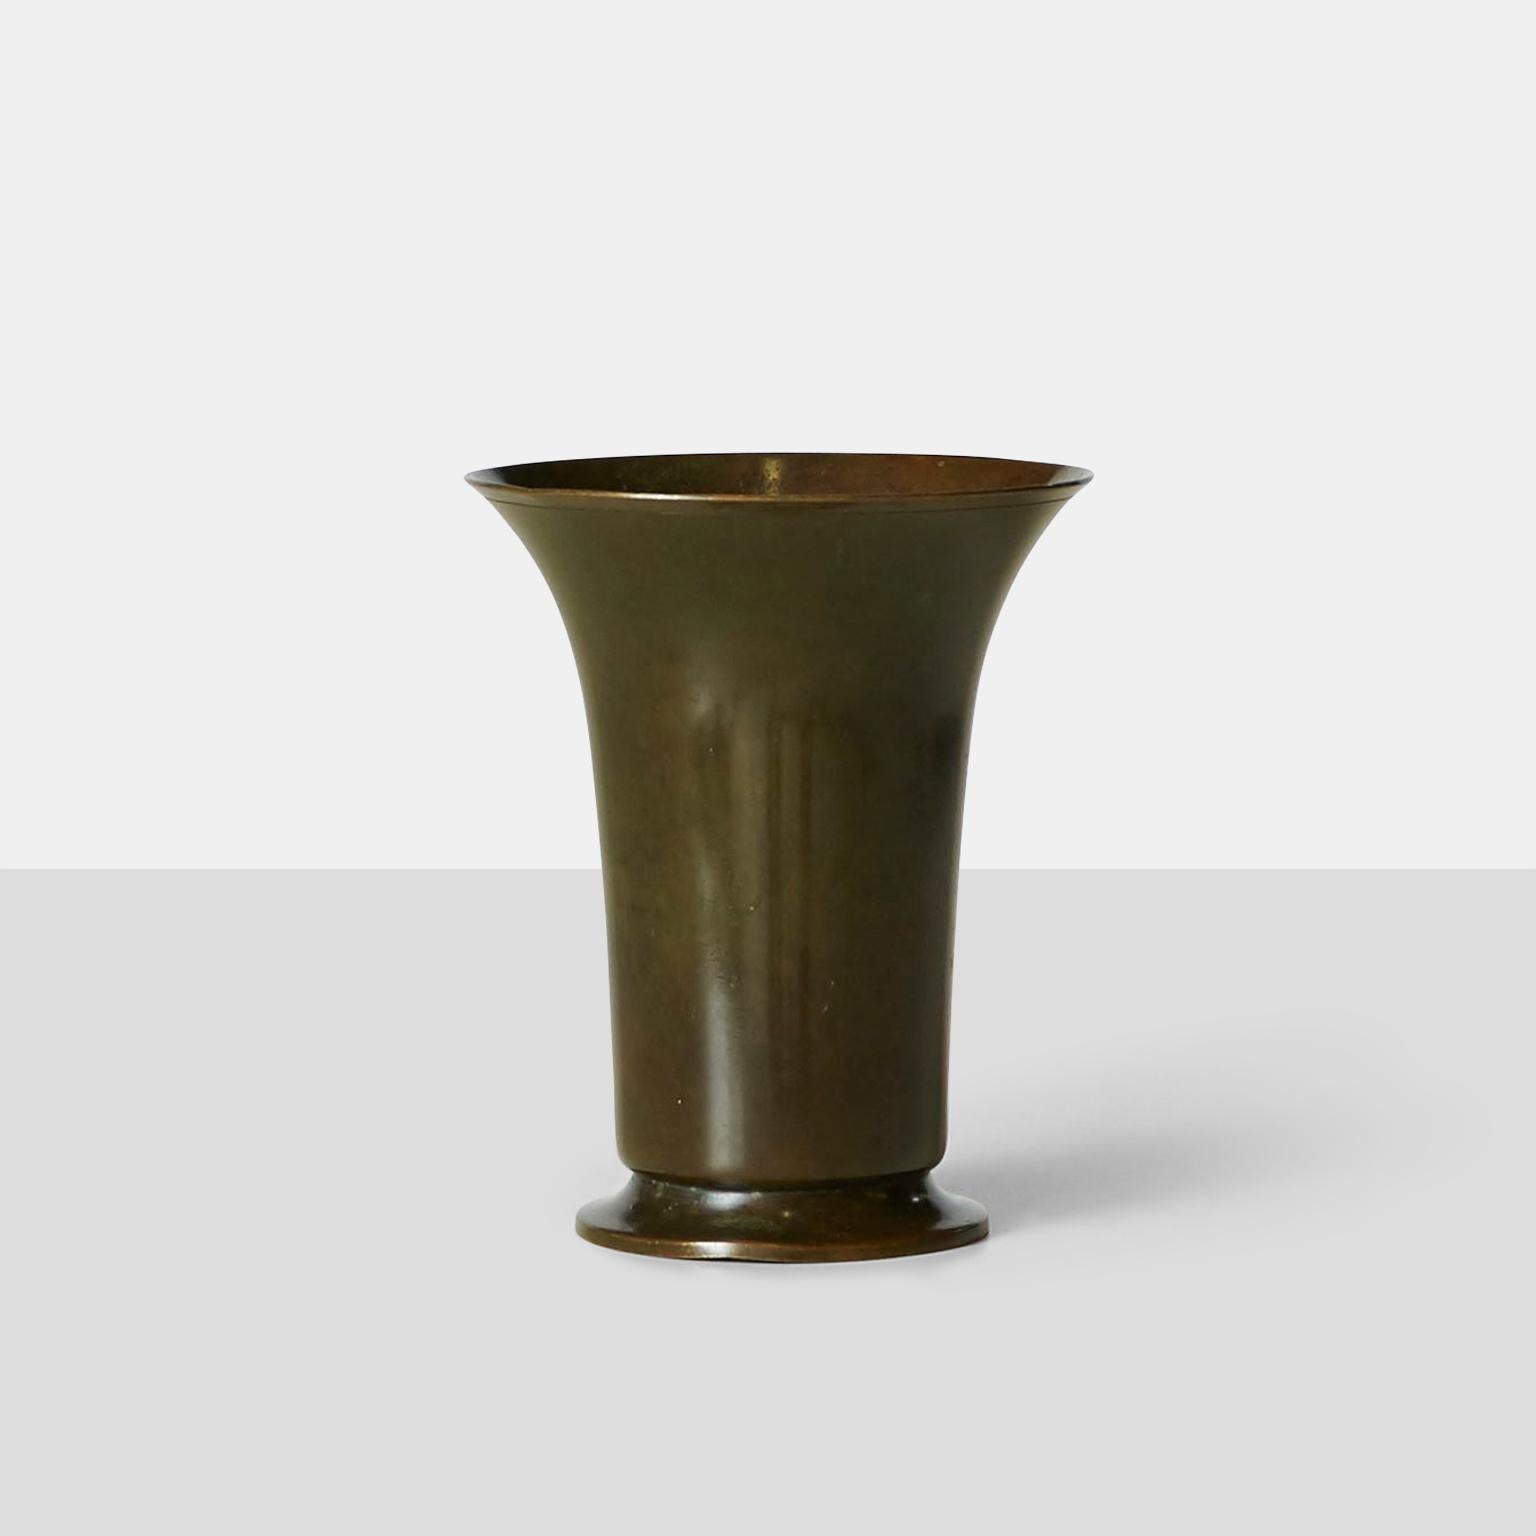 A bronze vessel with a flared rim by Just Andersen, made for his eponymous company, model #LB 1596. Terrific patina.